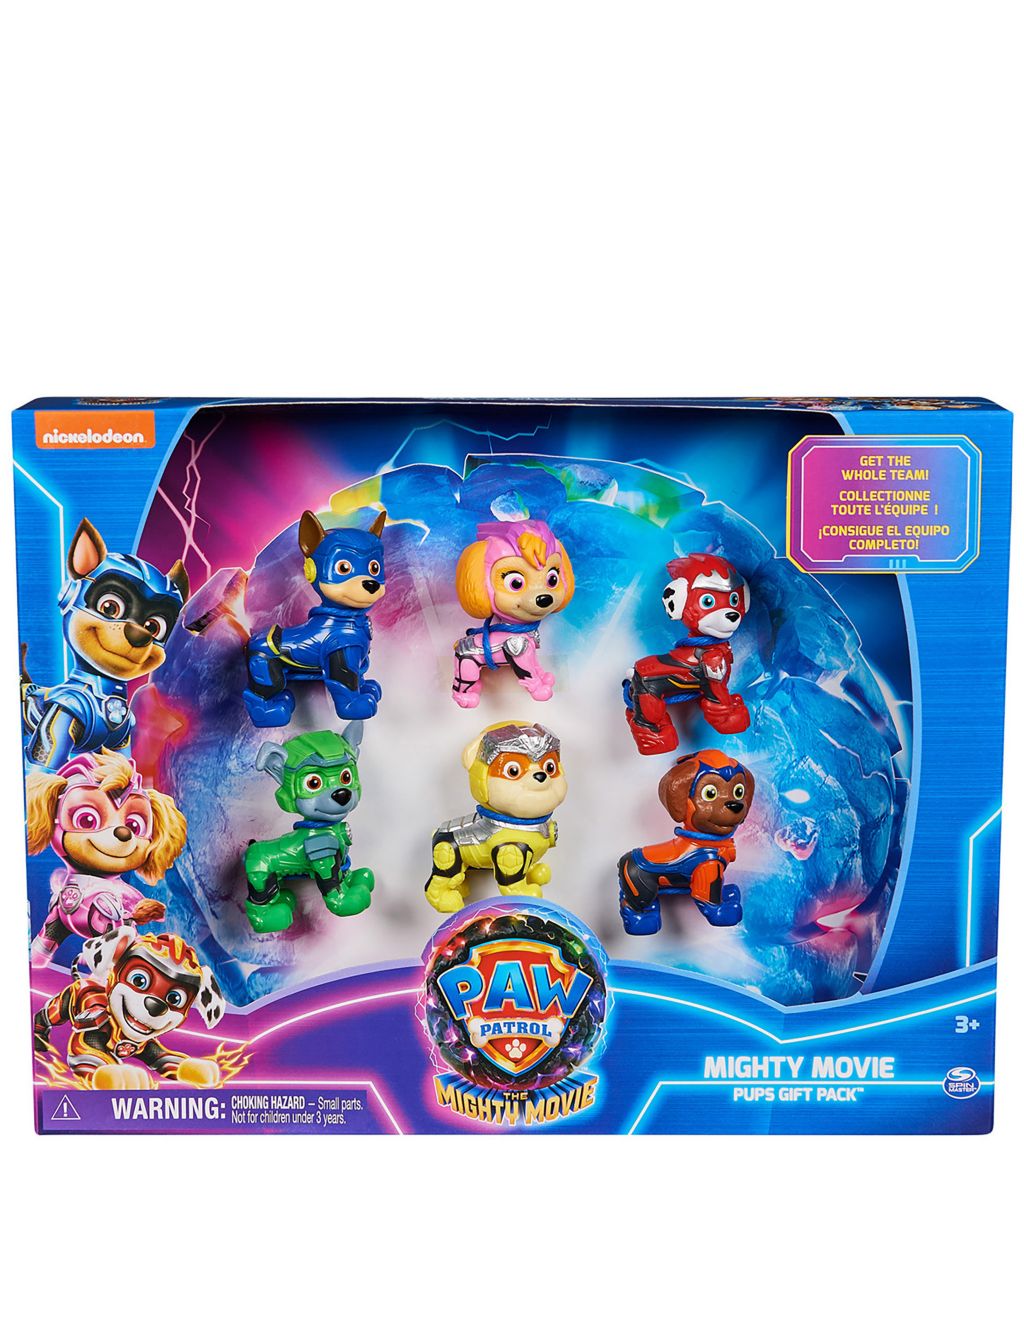 The Mighty Movie Pups Gift Pack (3+ Yrs), Paw Patrol